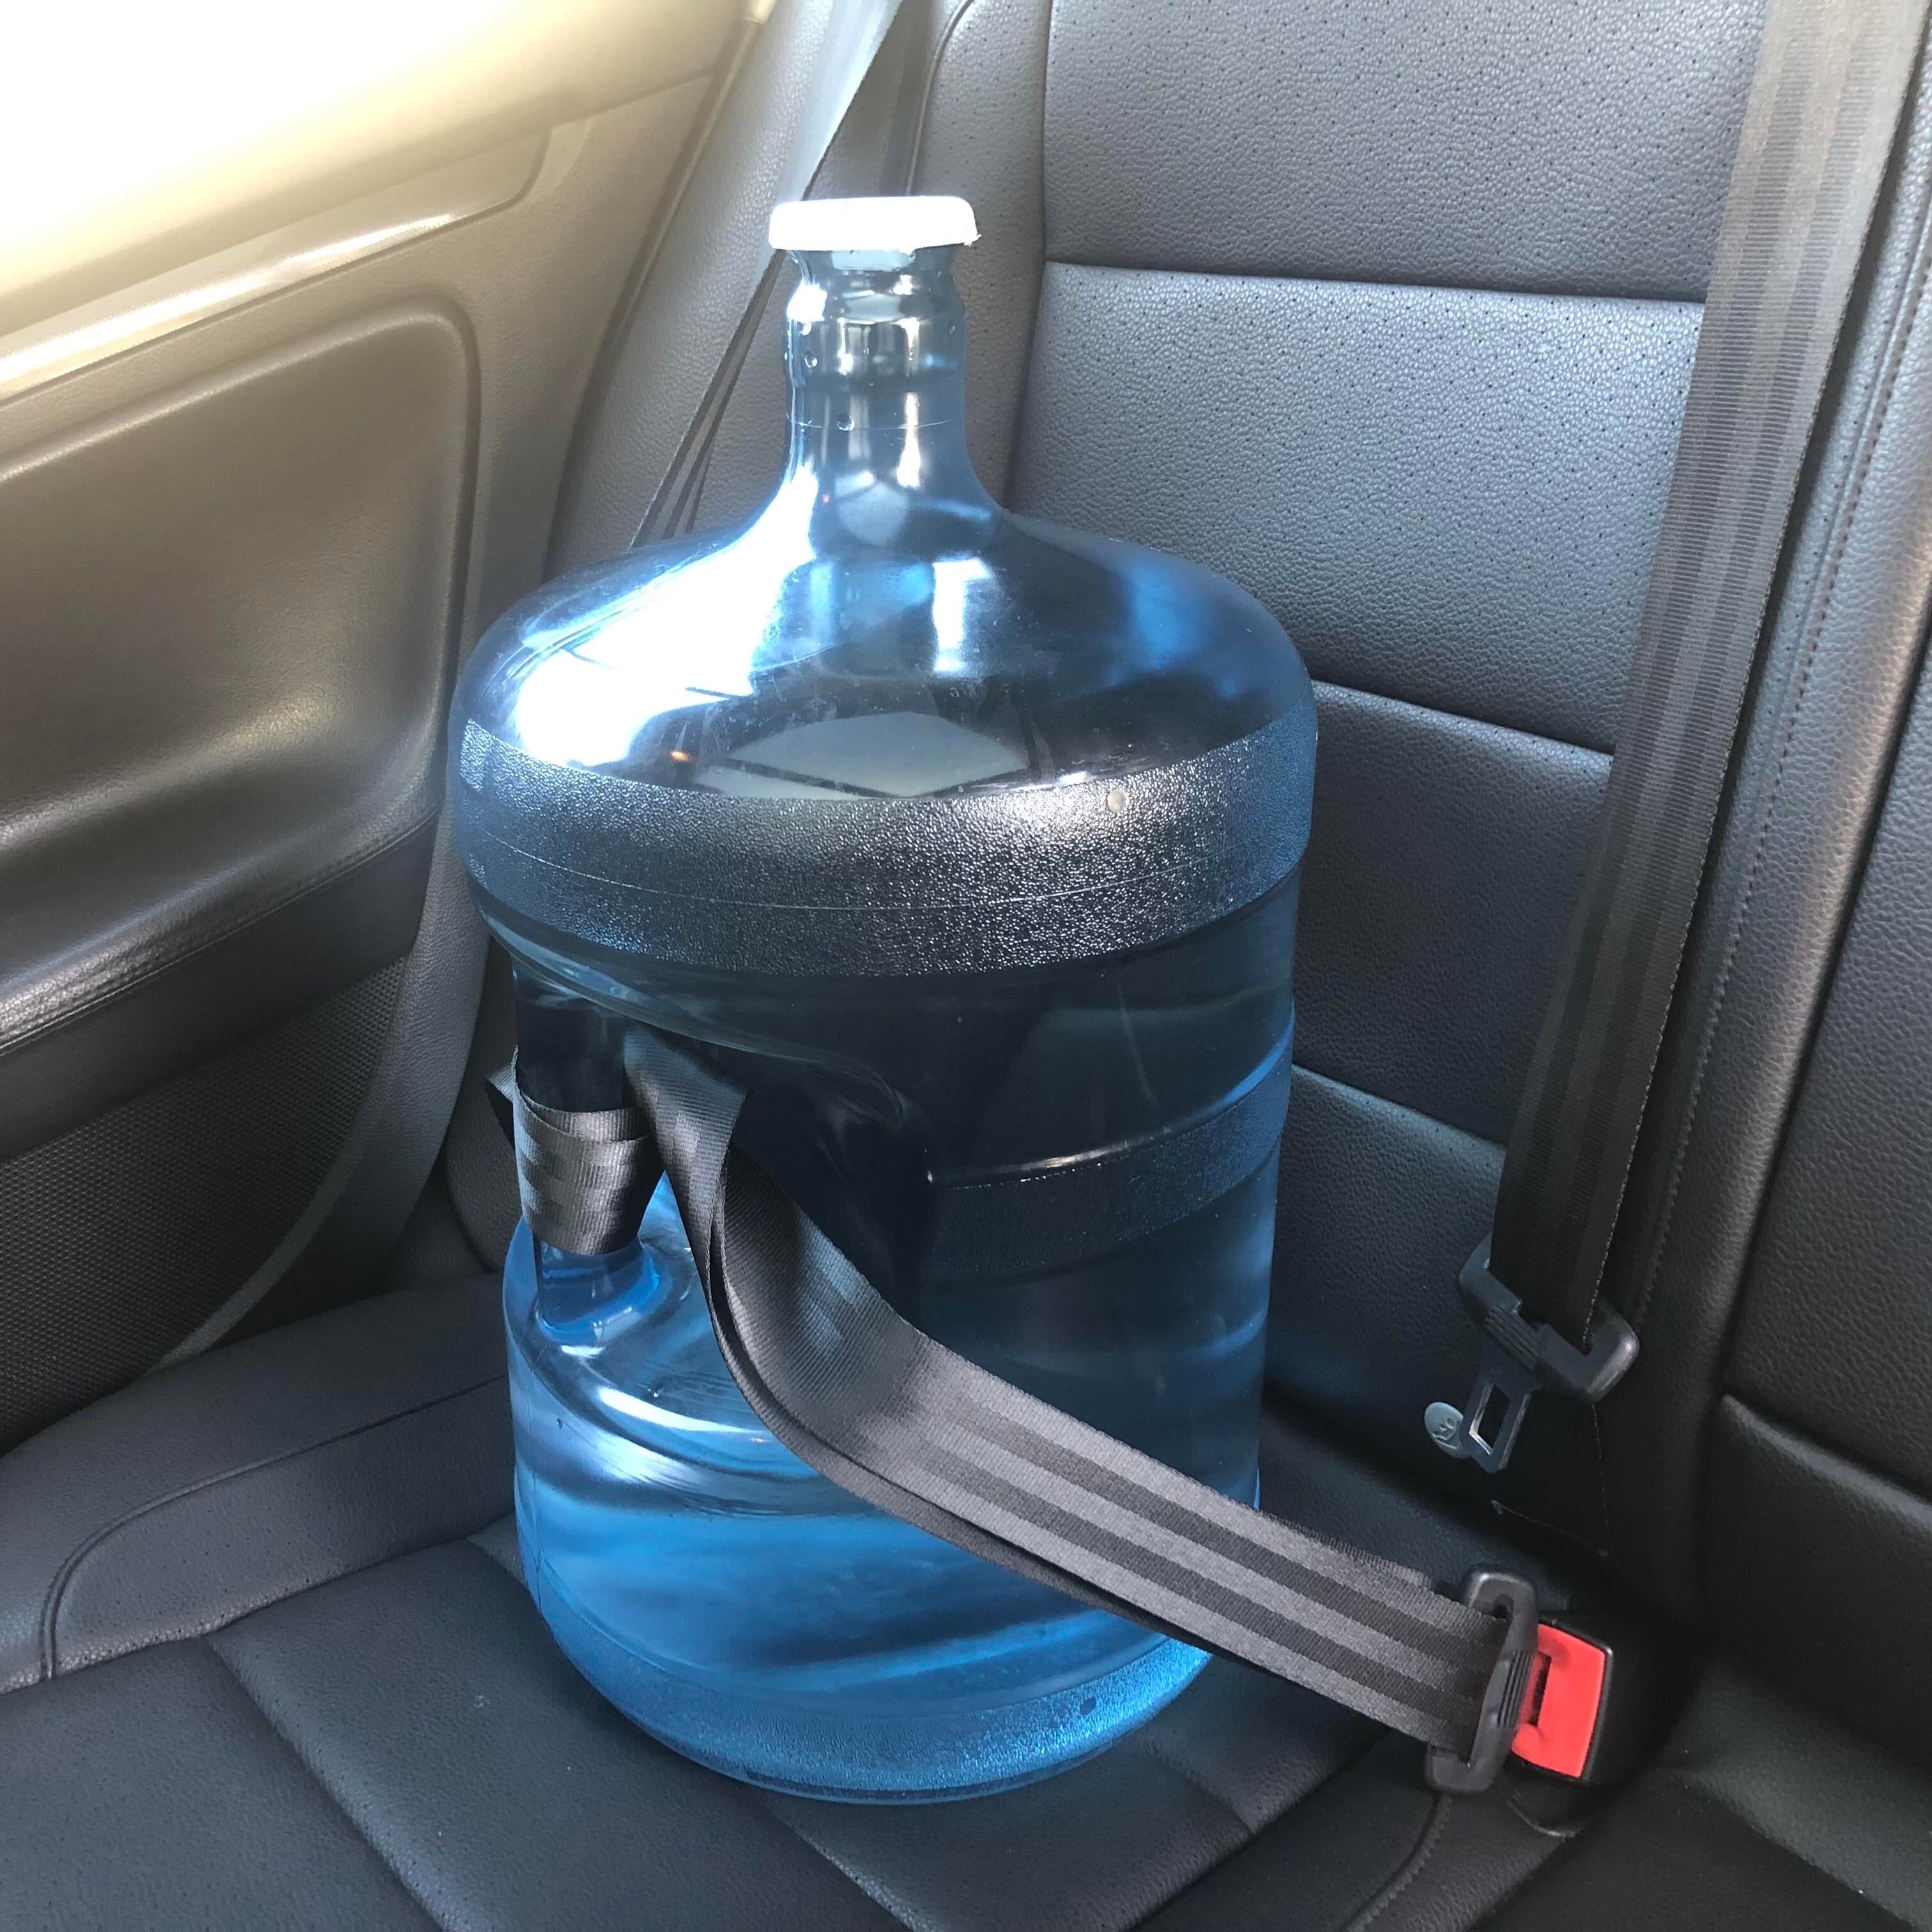 How to Transport Gallon Water Bottle